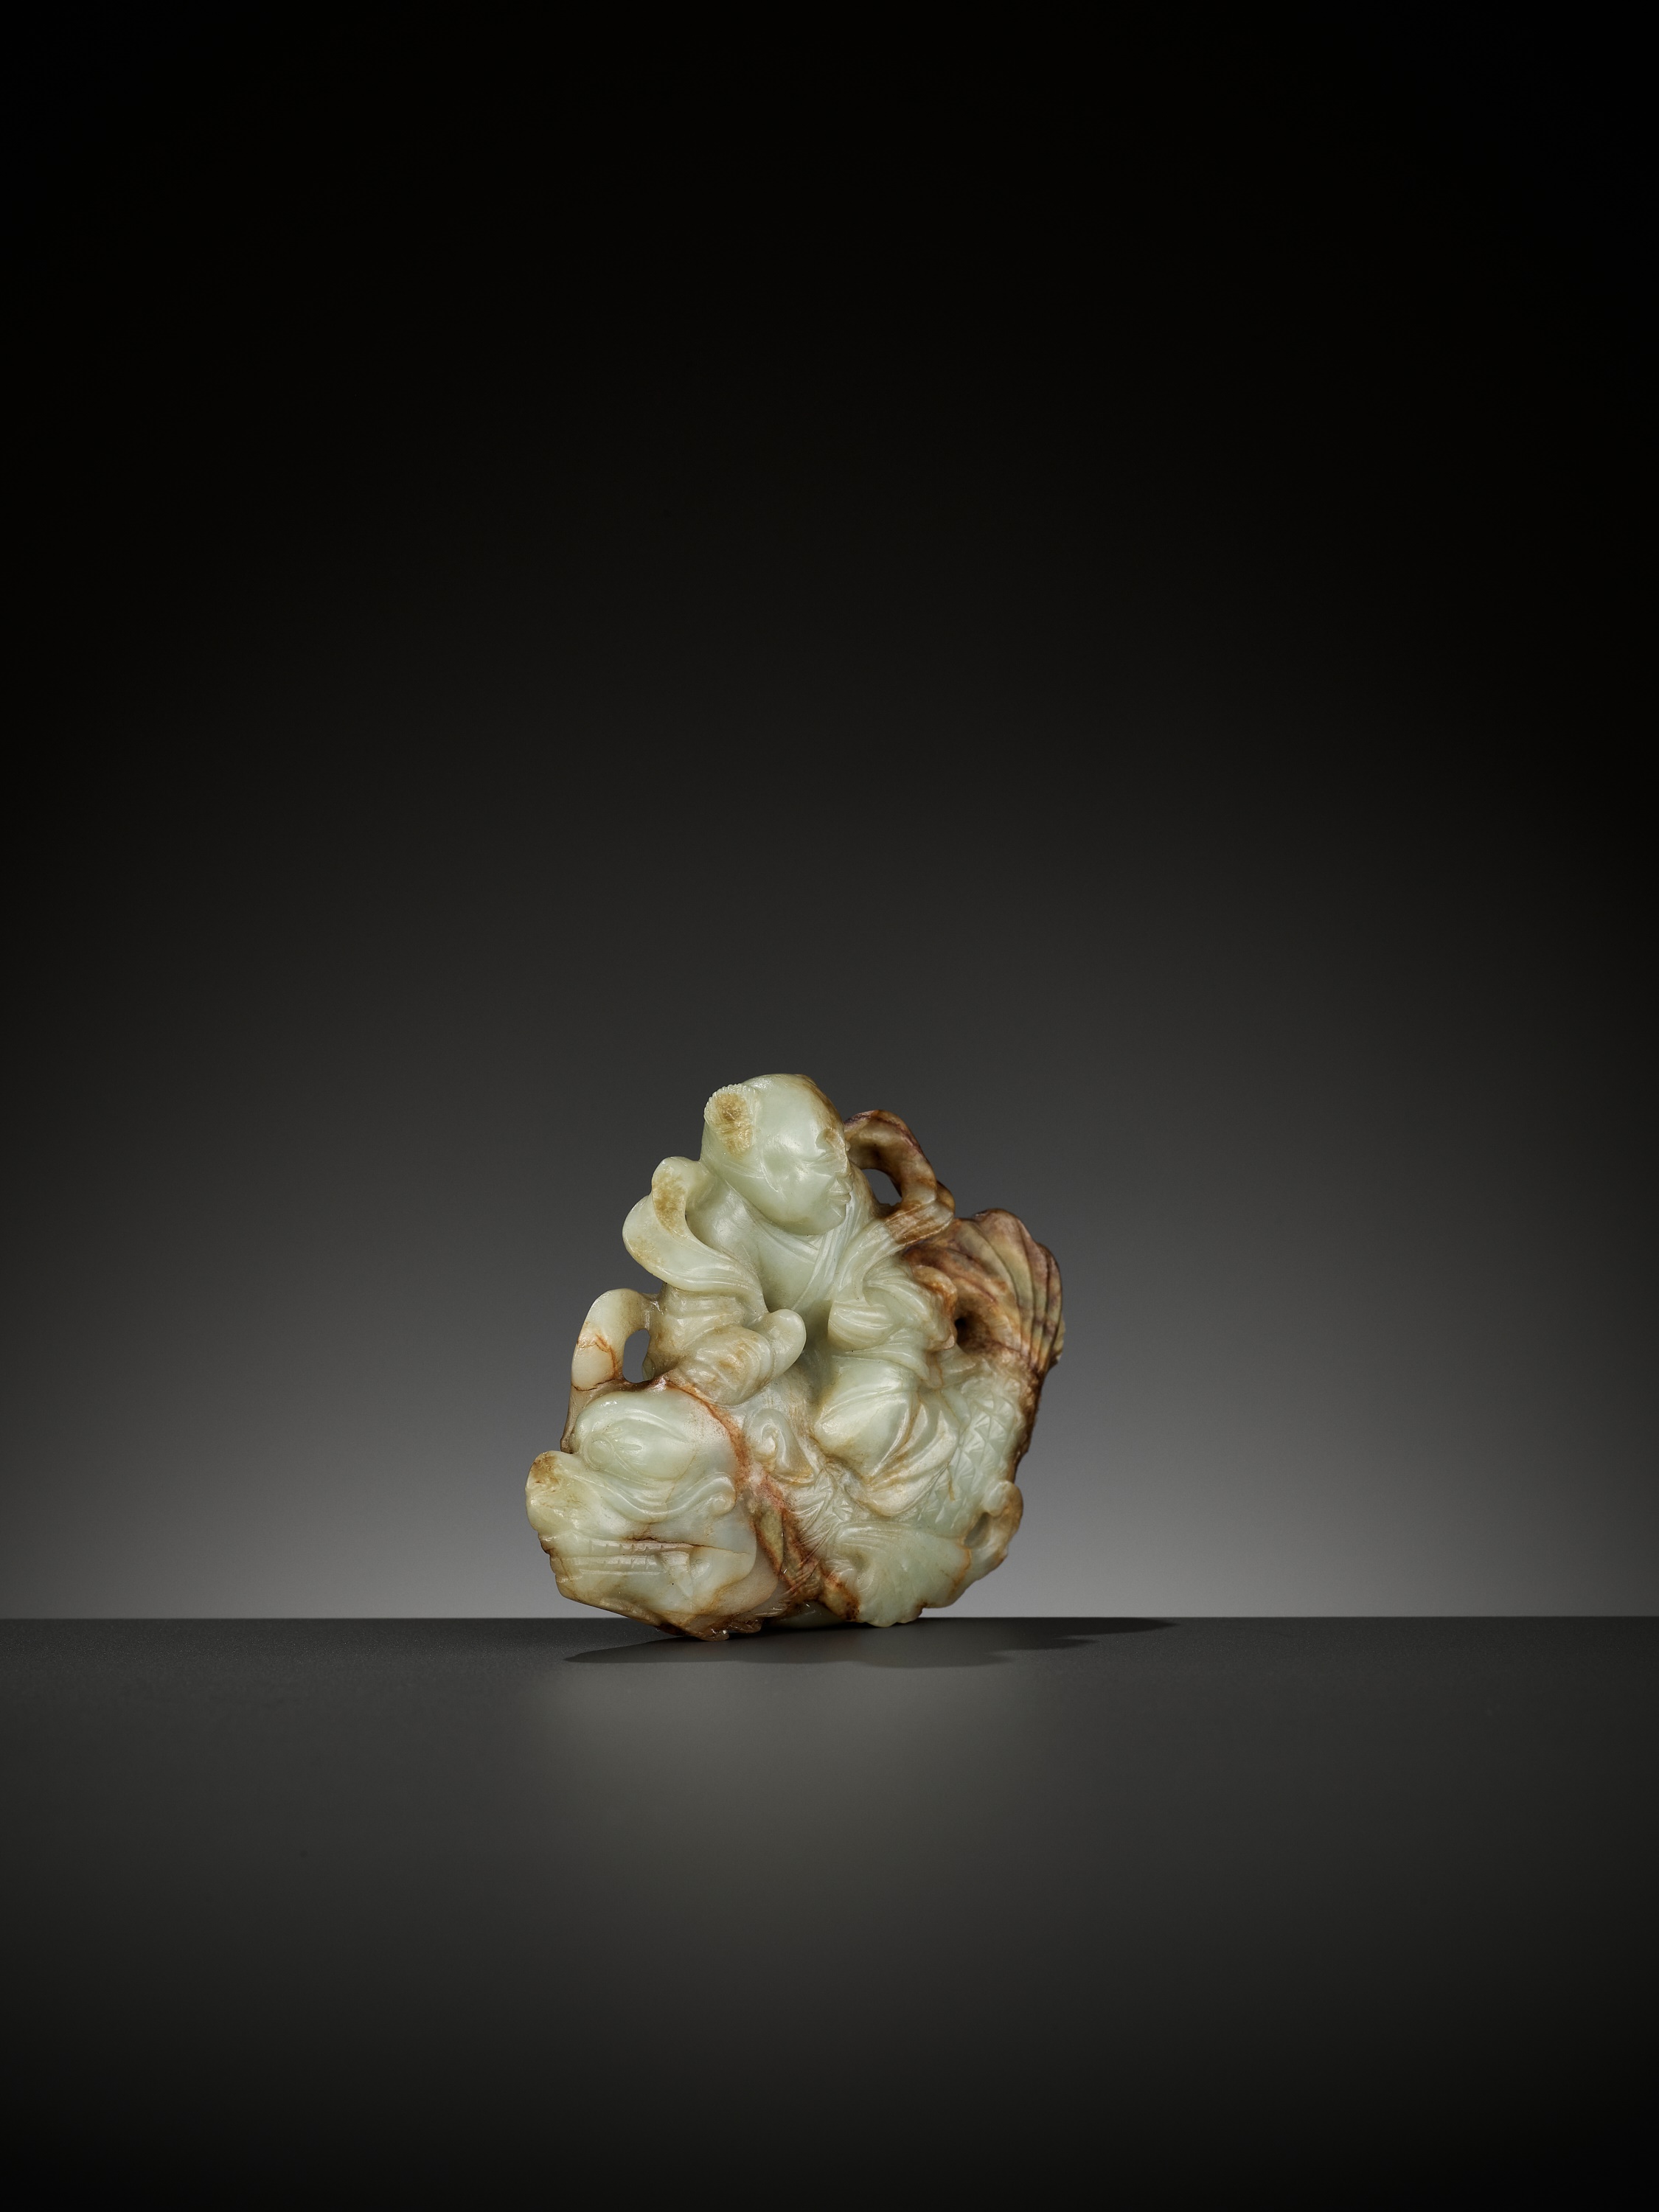 A CELADON AND RUSSET JADE FIGURE OF A BOY RIDING A DRAGON-CARP, 17TH-18TH CENTURY - Image 9 of 13